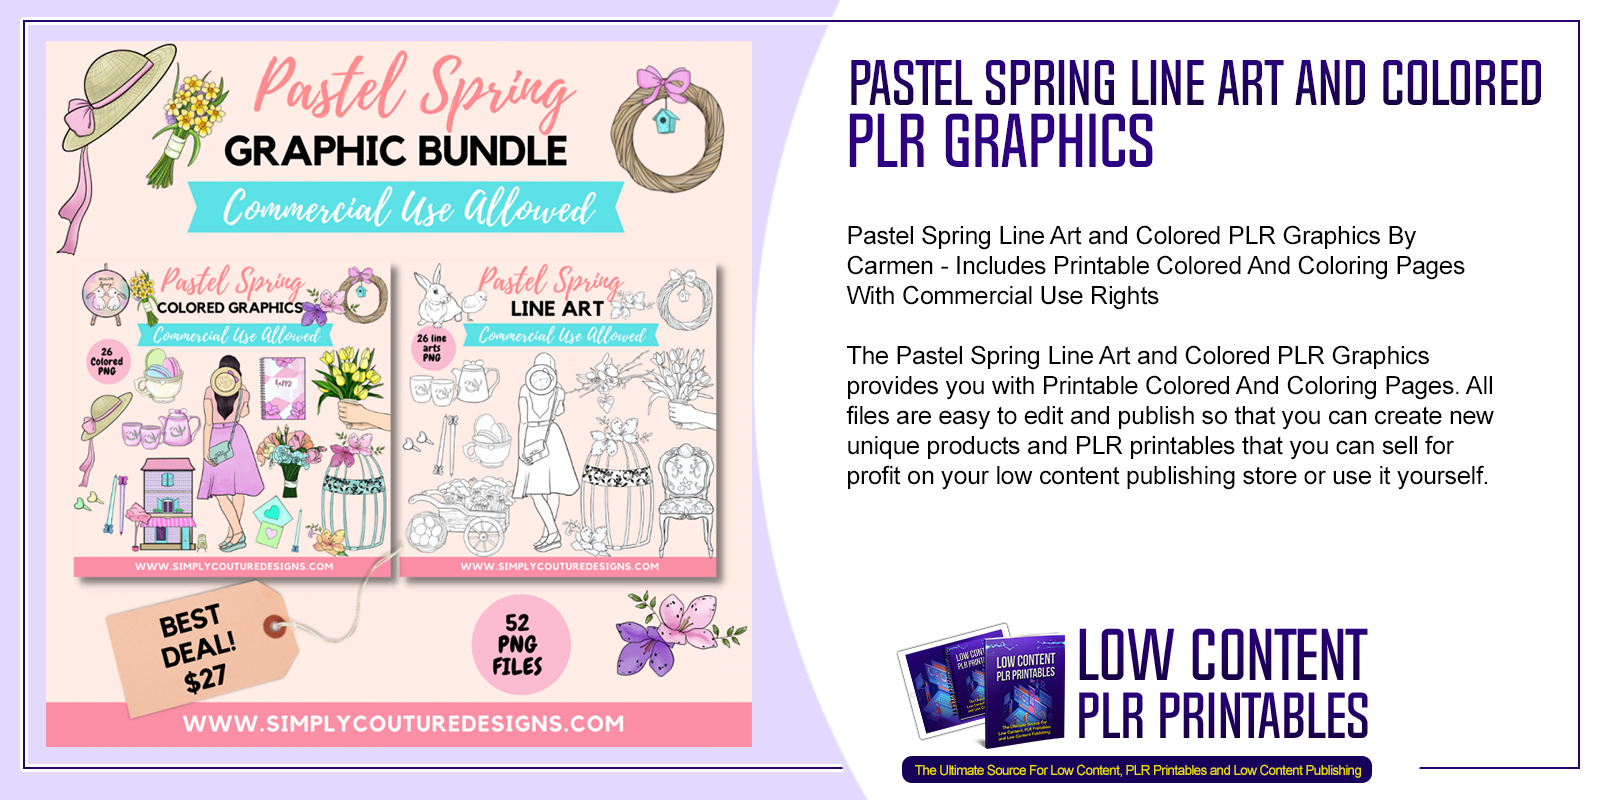 Pastel Spring Line Art and Colored PLR Graphics